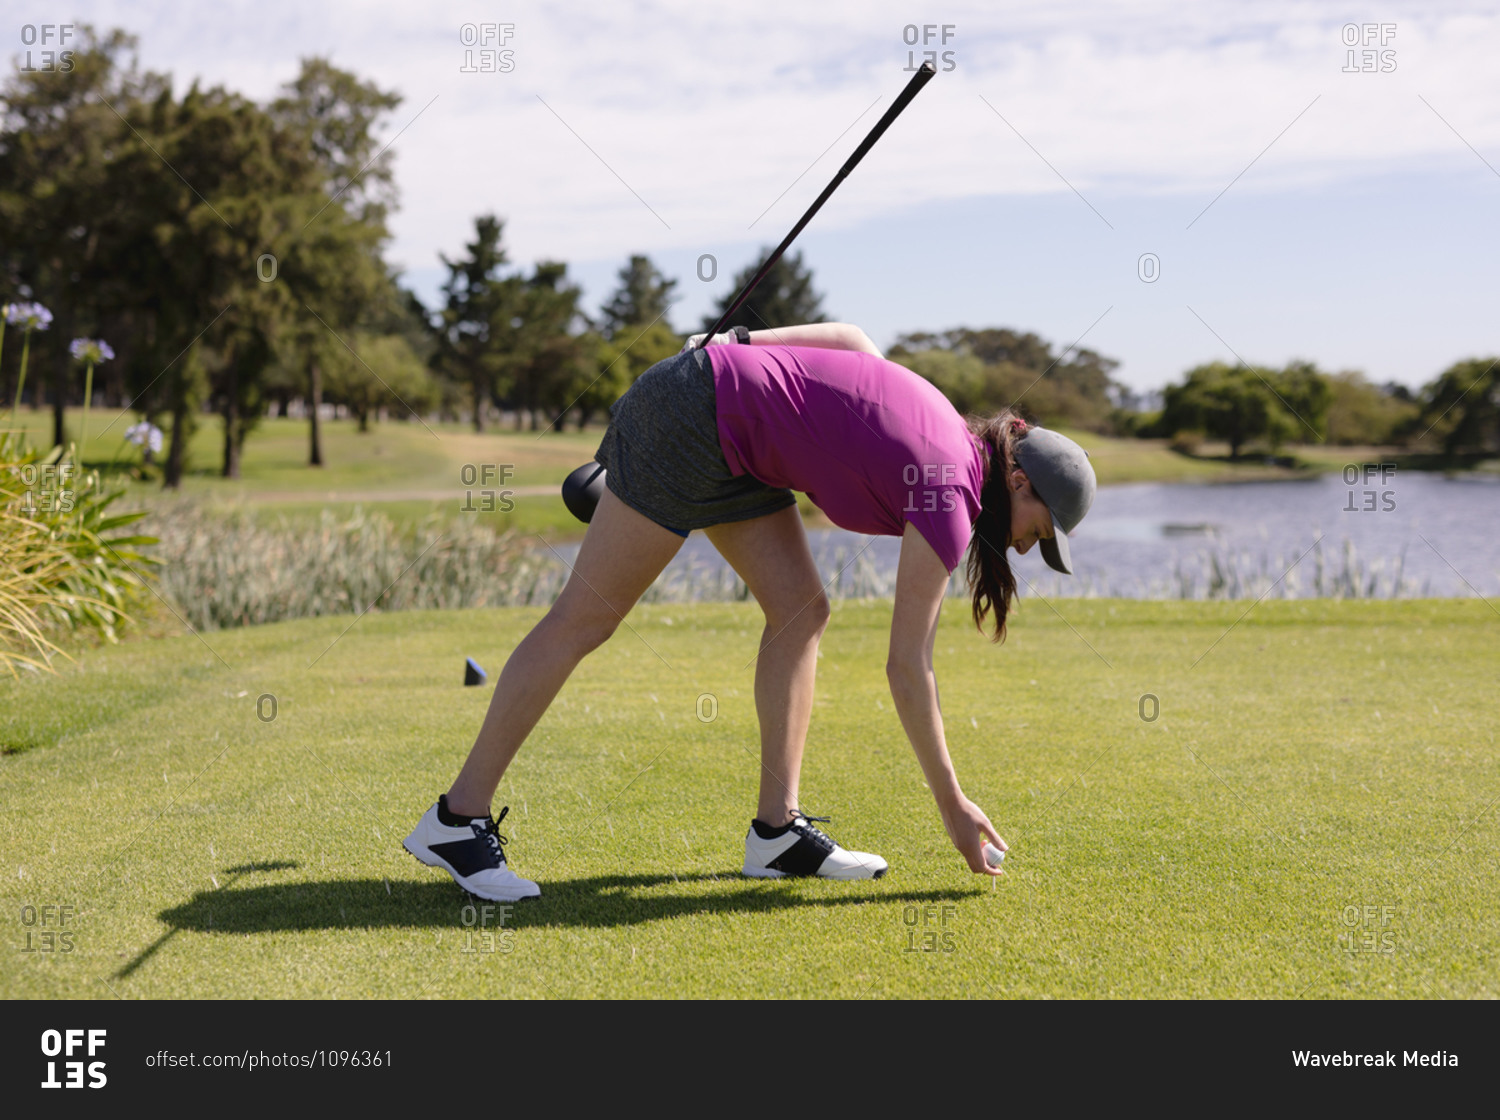 Caucasian woman playing golf placing the ball before taking a shot. sport leisure hobbies golf healthy outdoor lifestyle.